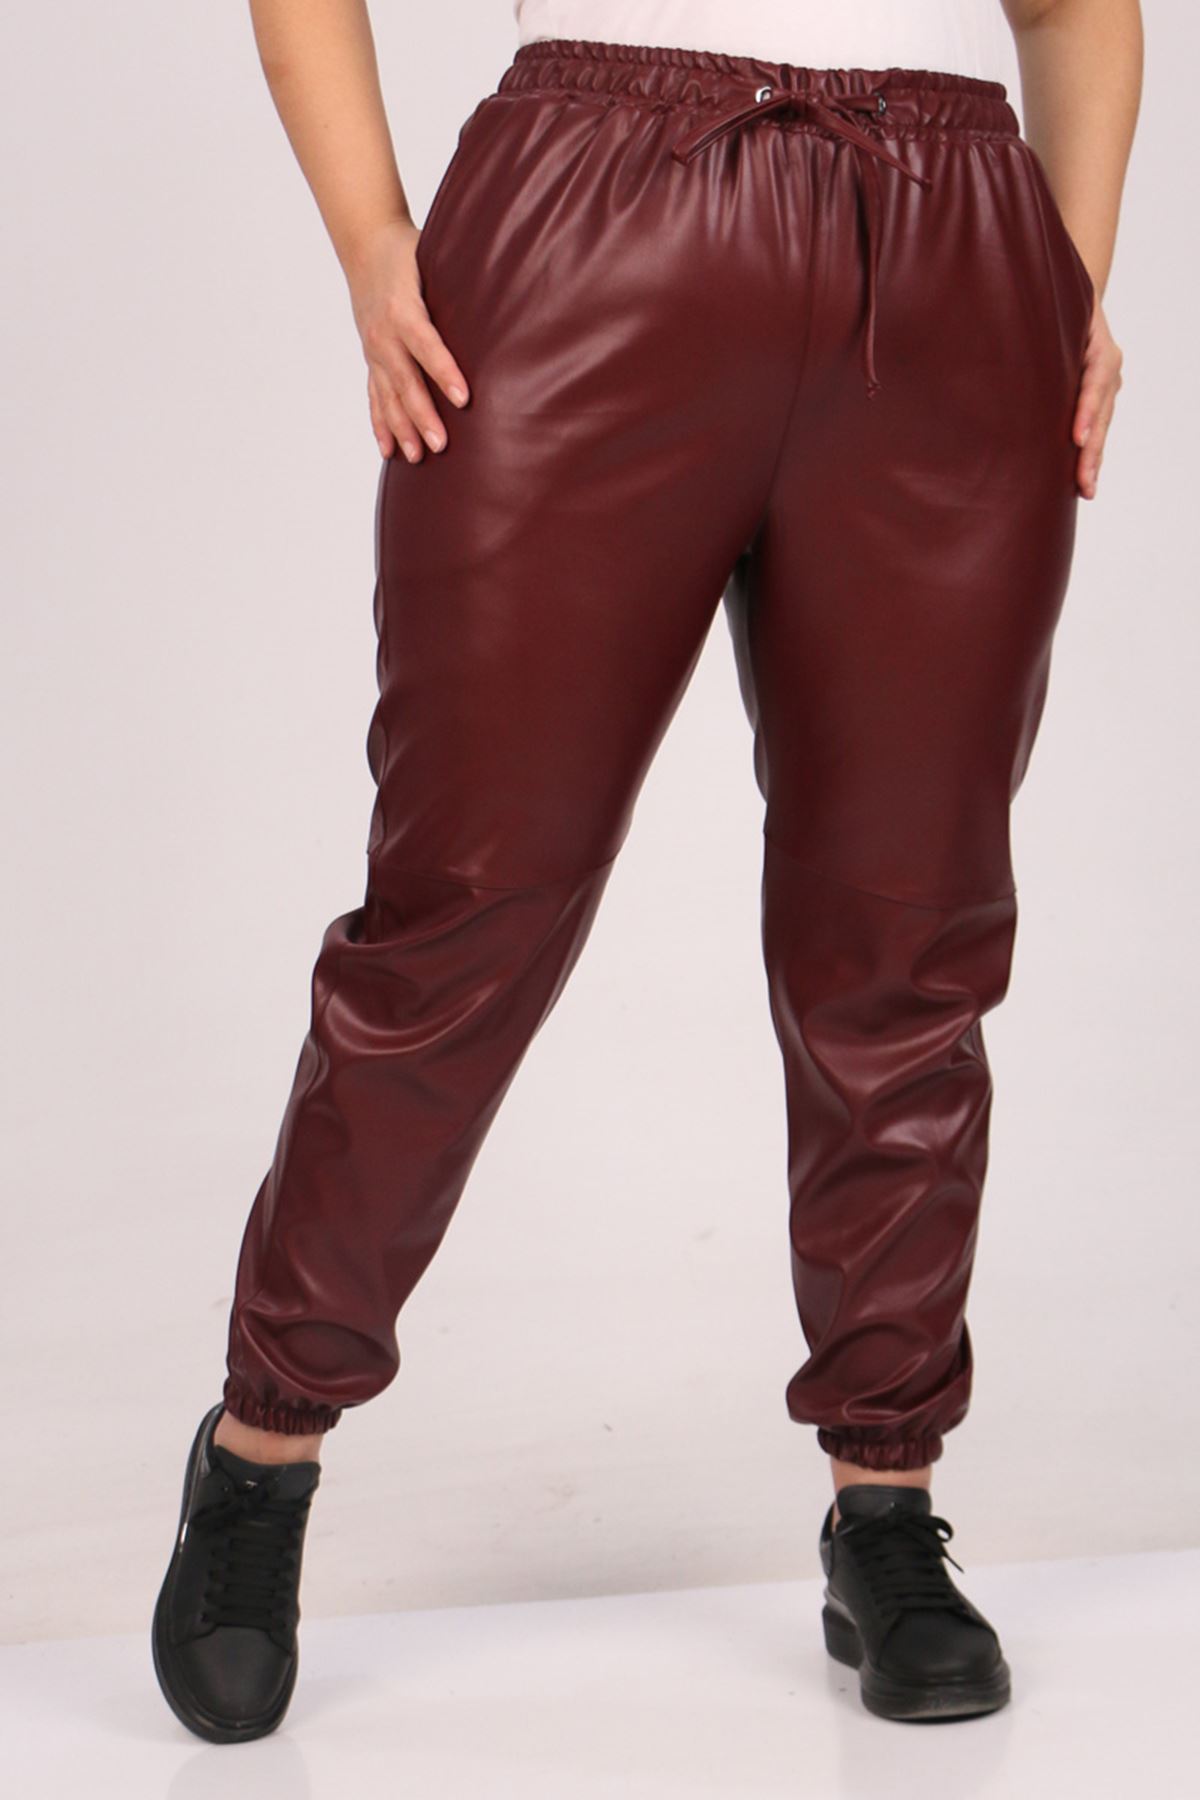 39051 Large Size Leather Trousers with Elastic Legs-Burgundy